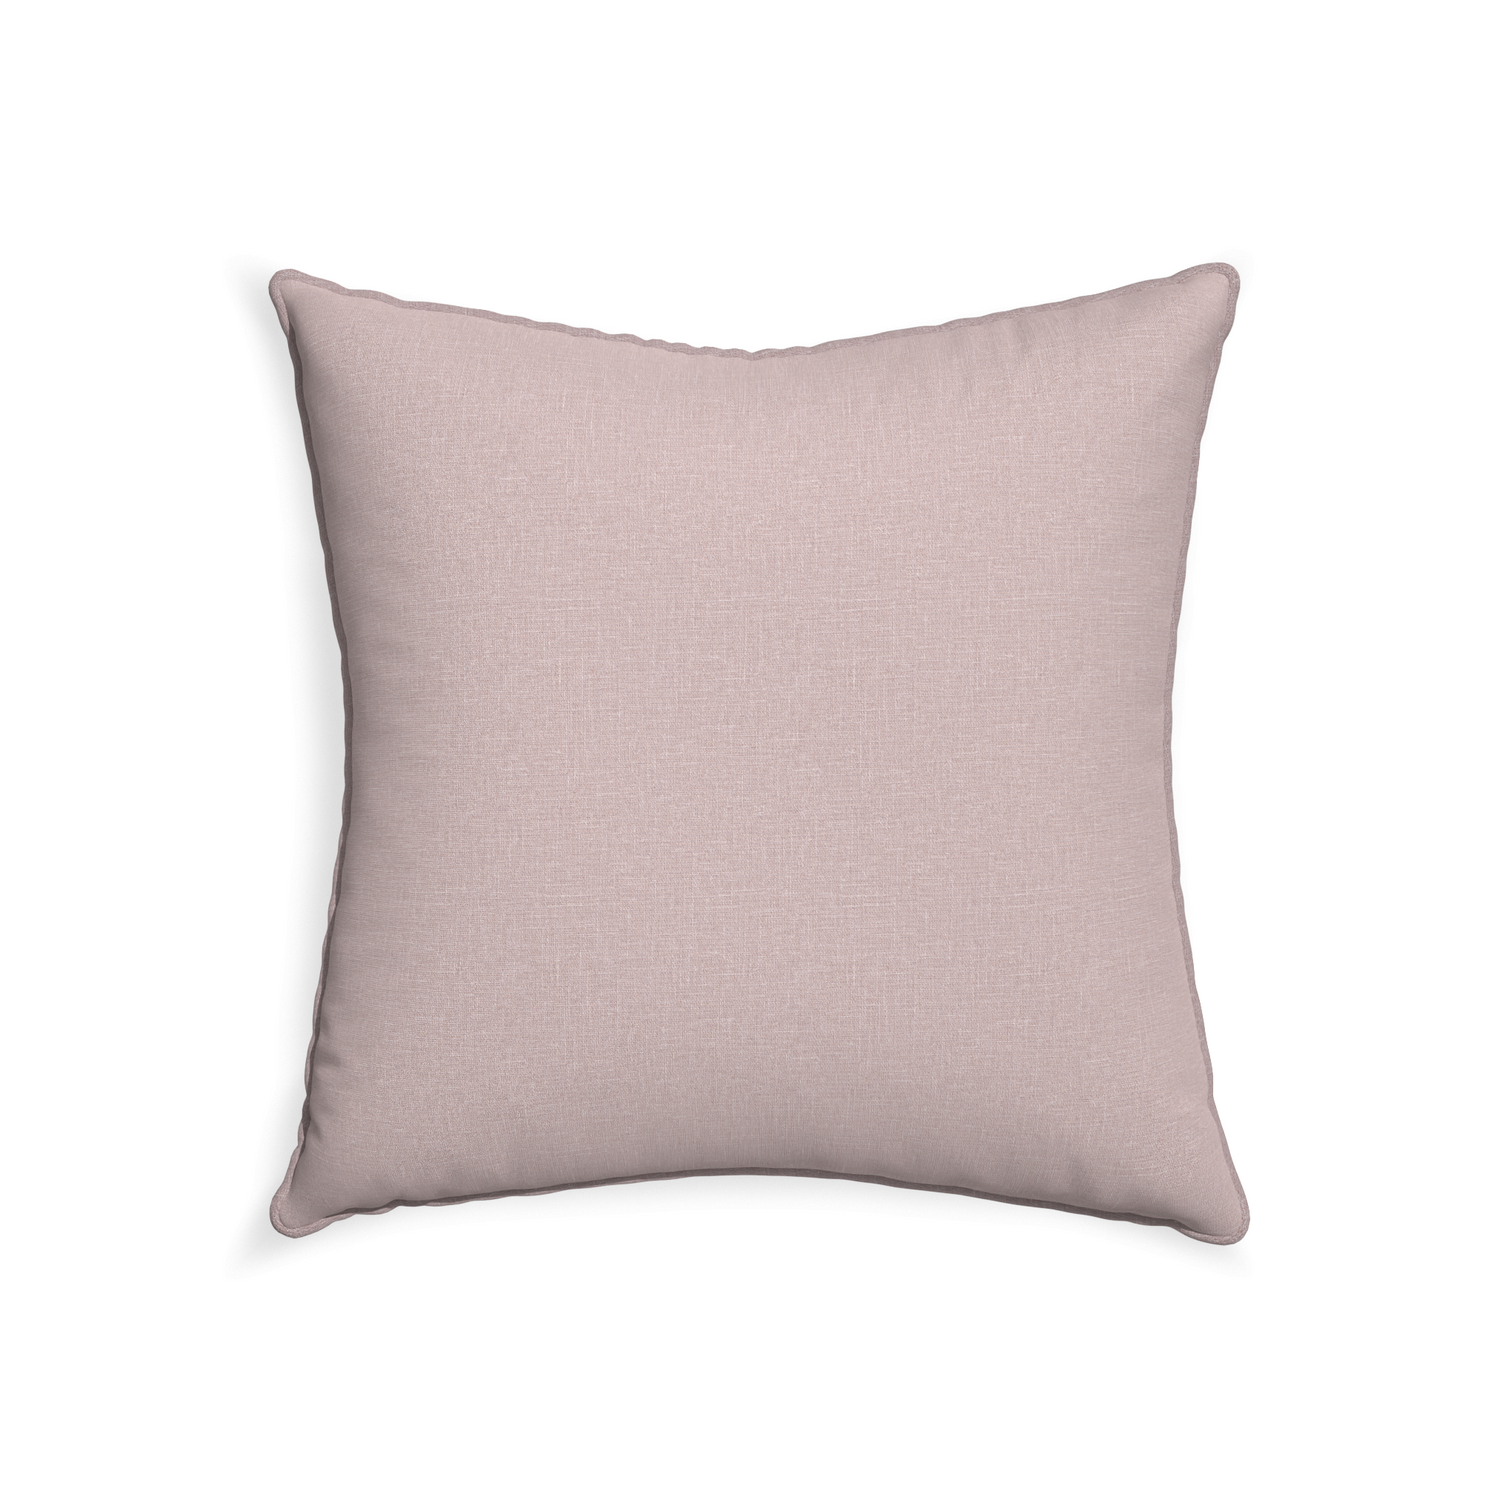 22-square orchid custom mauve pinkpillow with orchid piping on white background